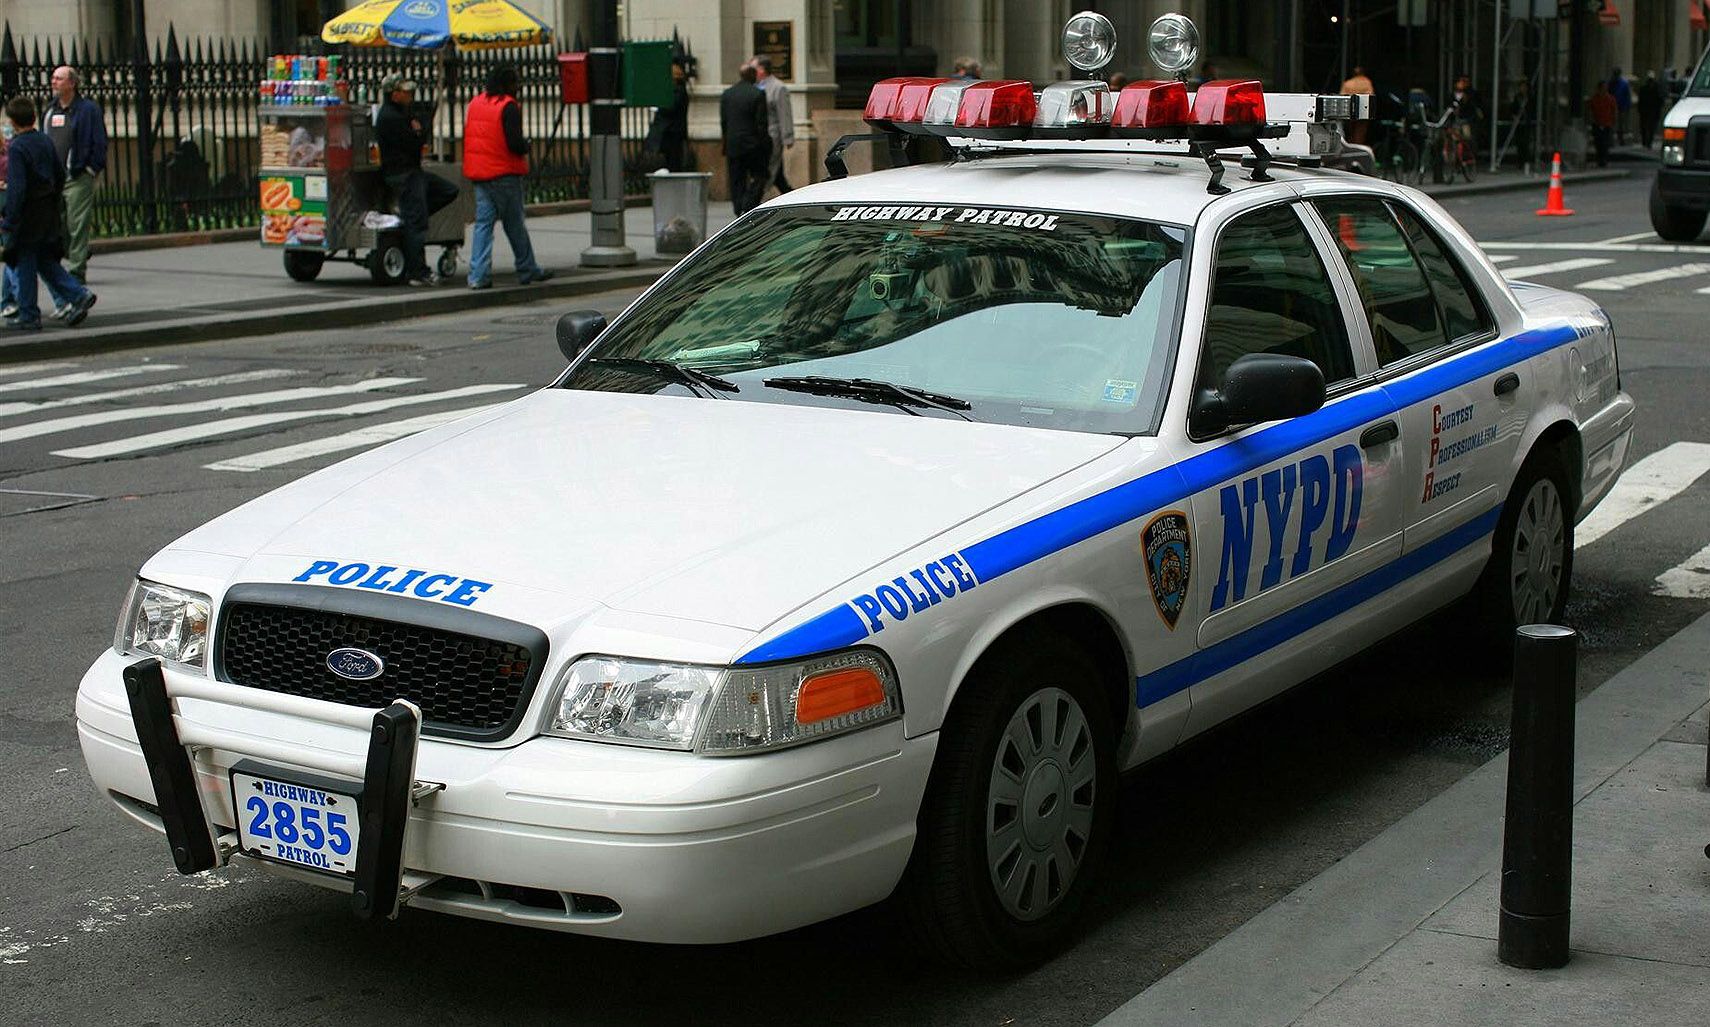 The Ford Crown Victoria